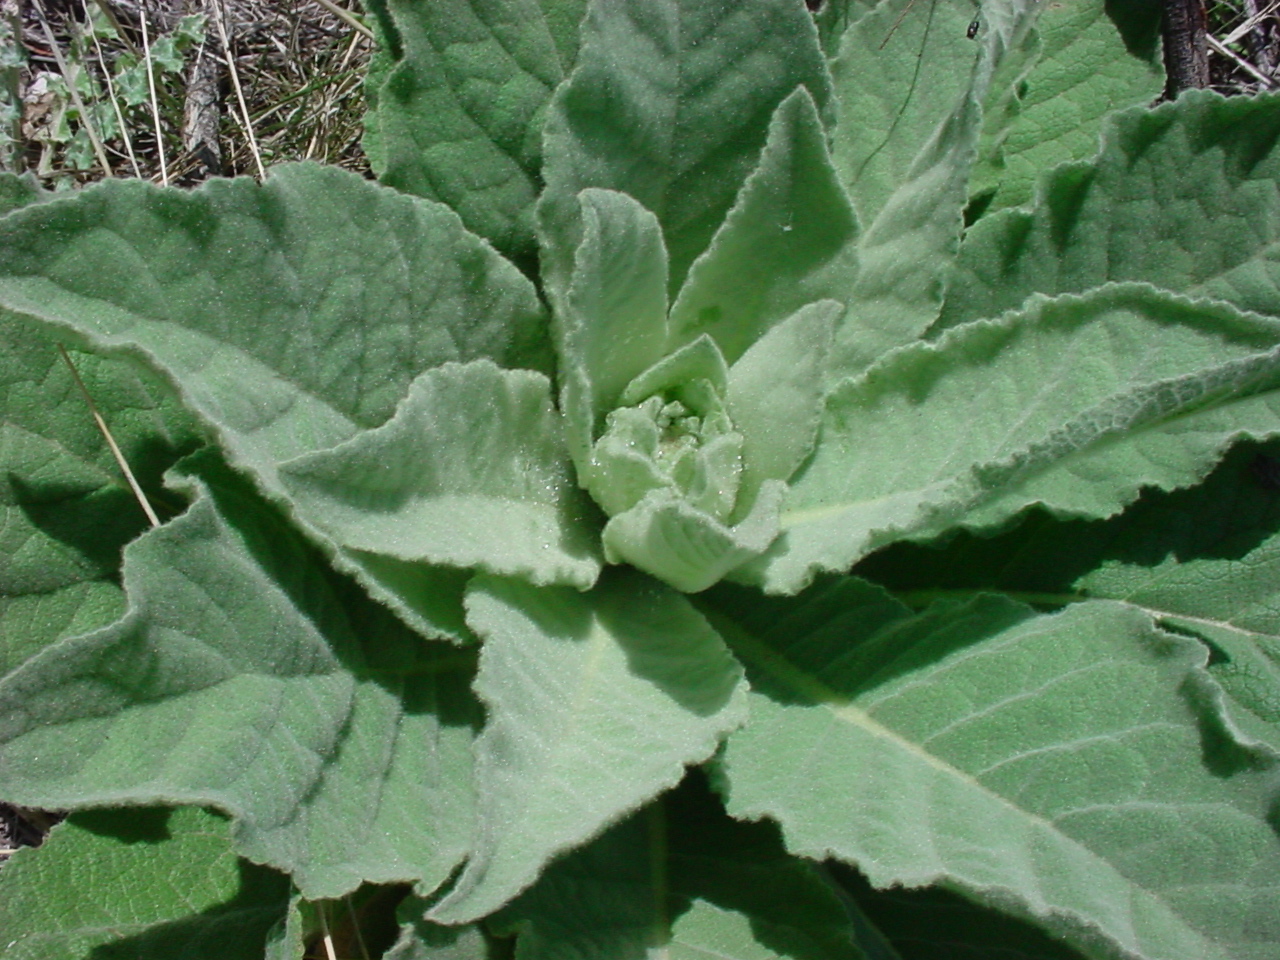 Fuzzy, light green basal leaves of a young plant